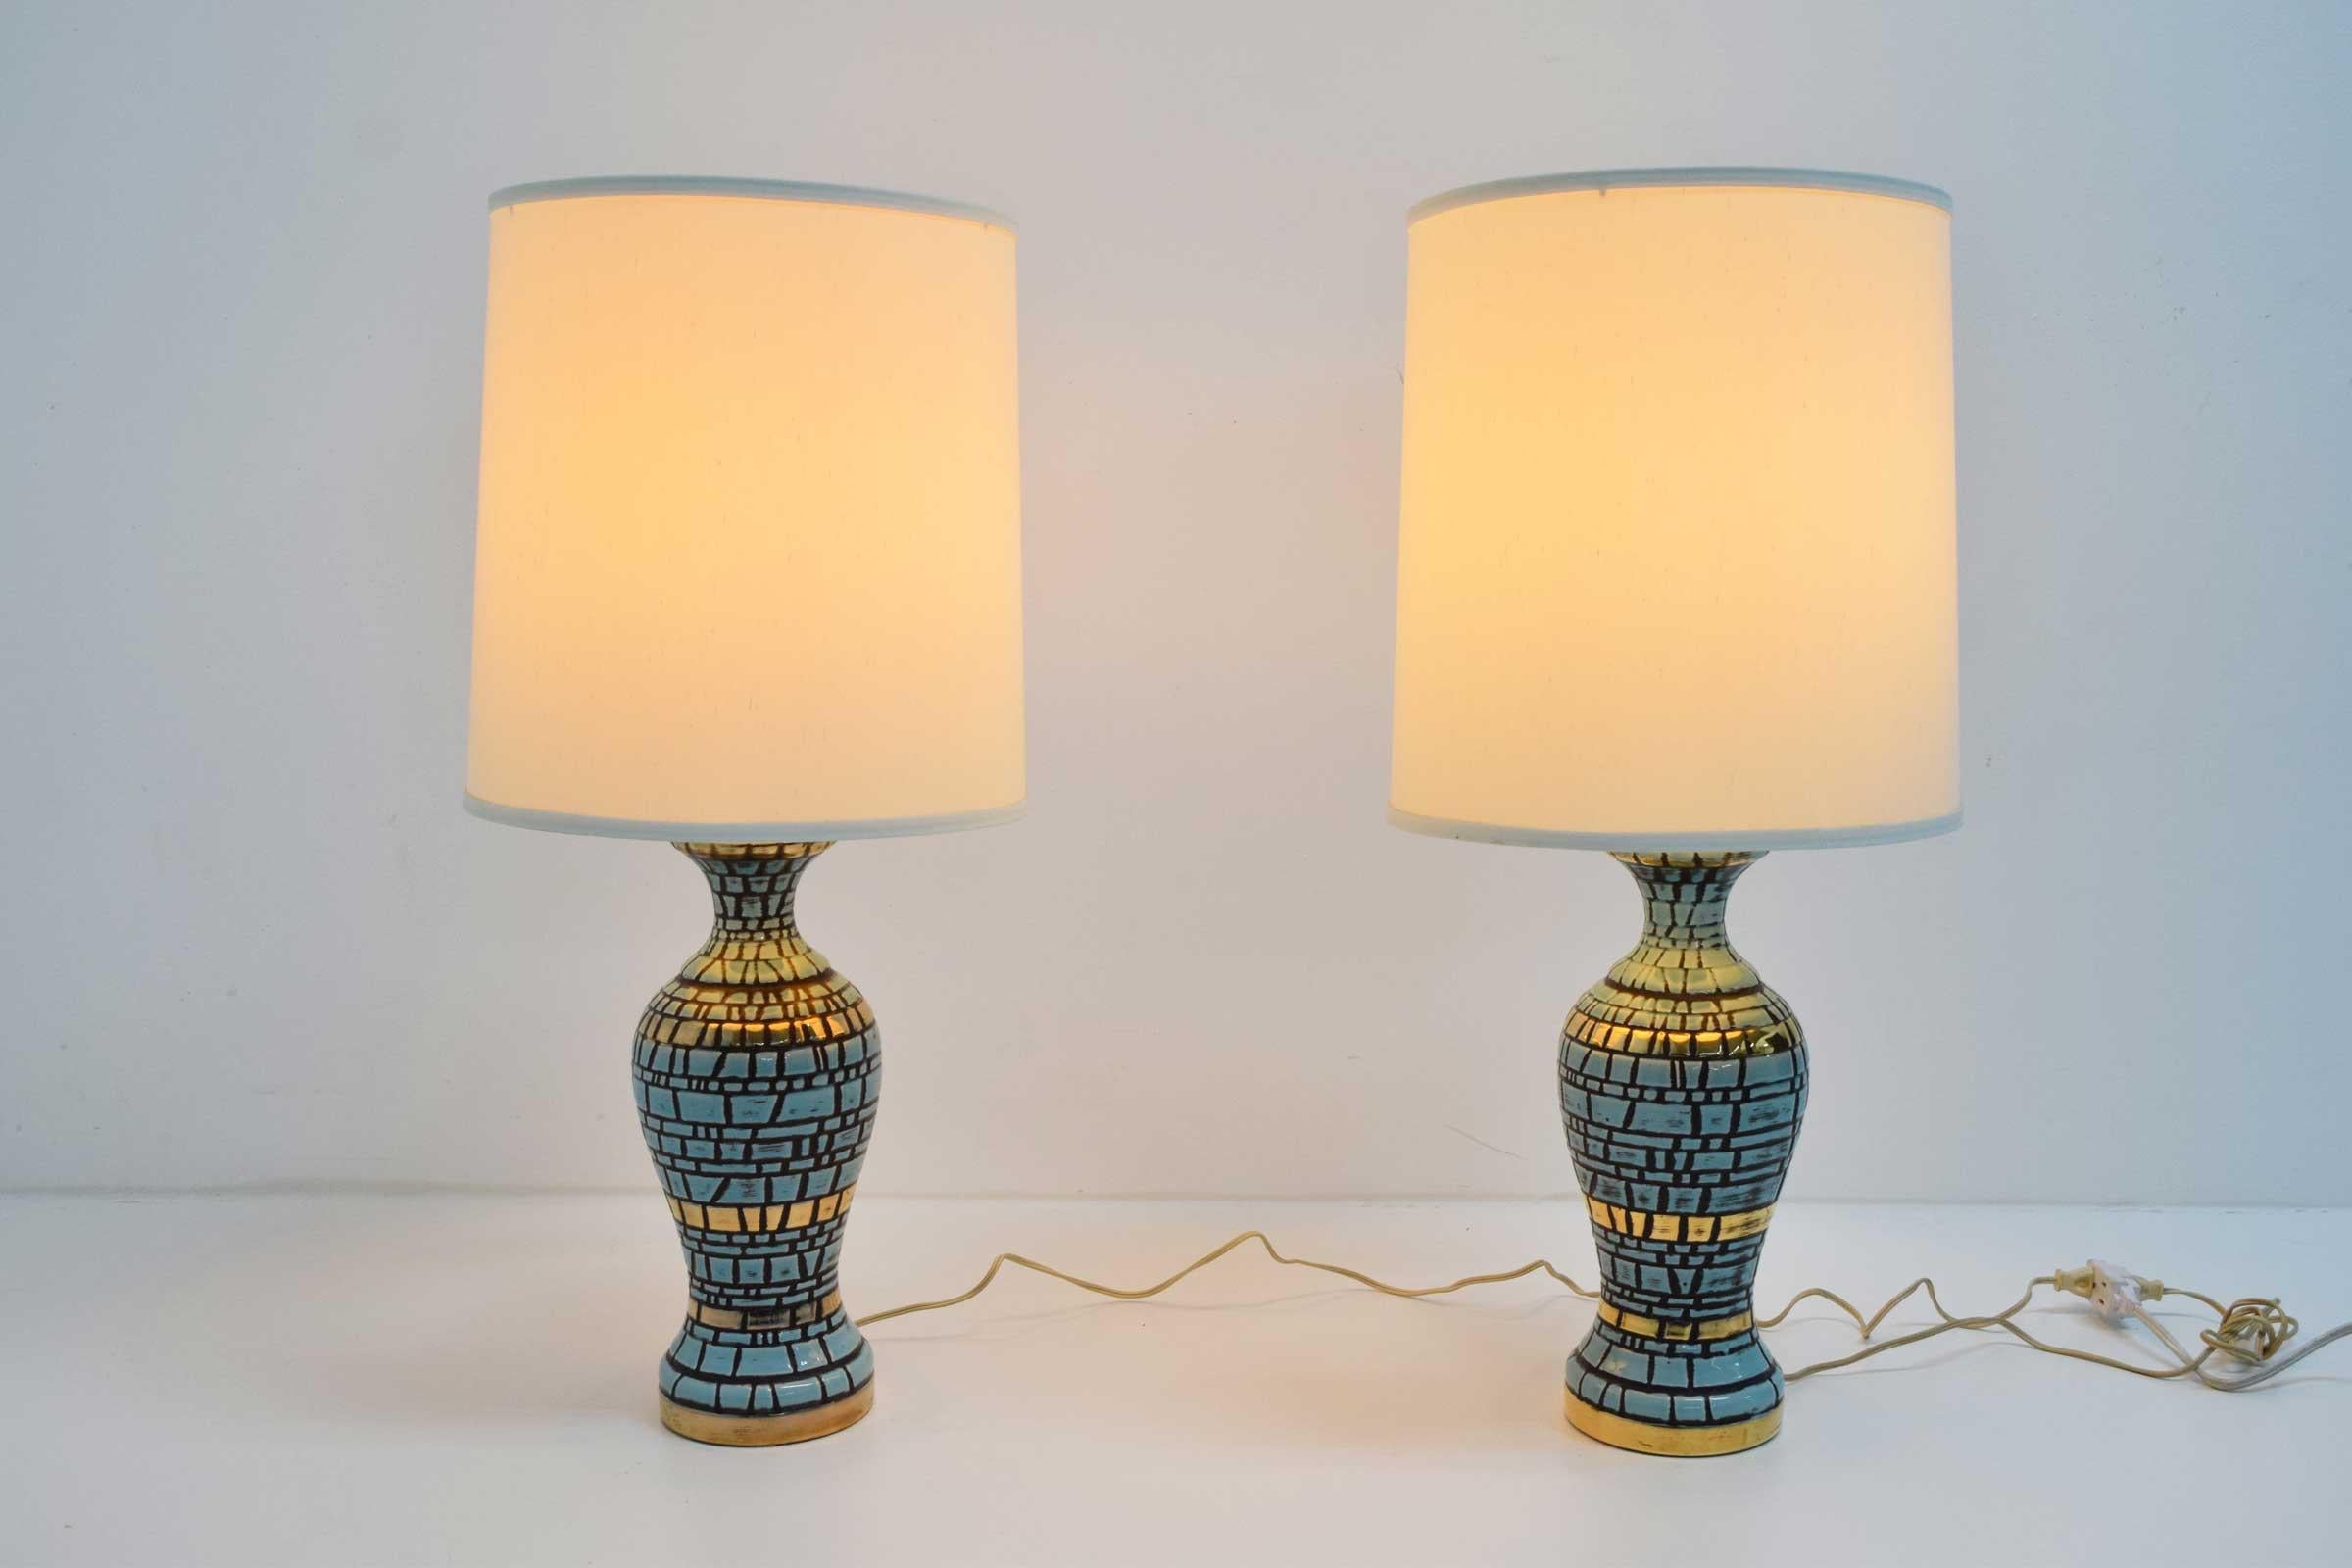 Midcentury Ceramic Tiled Lamps in Turquoise and Gold 1